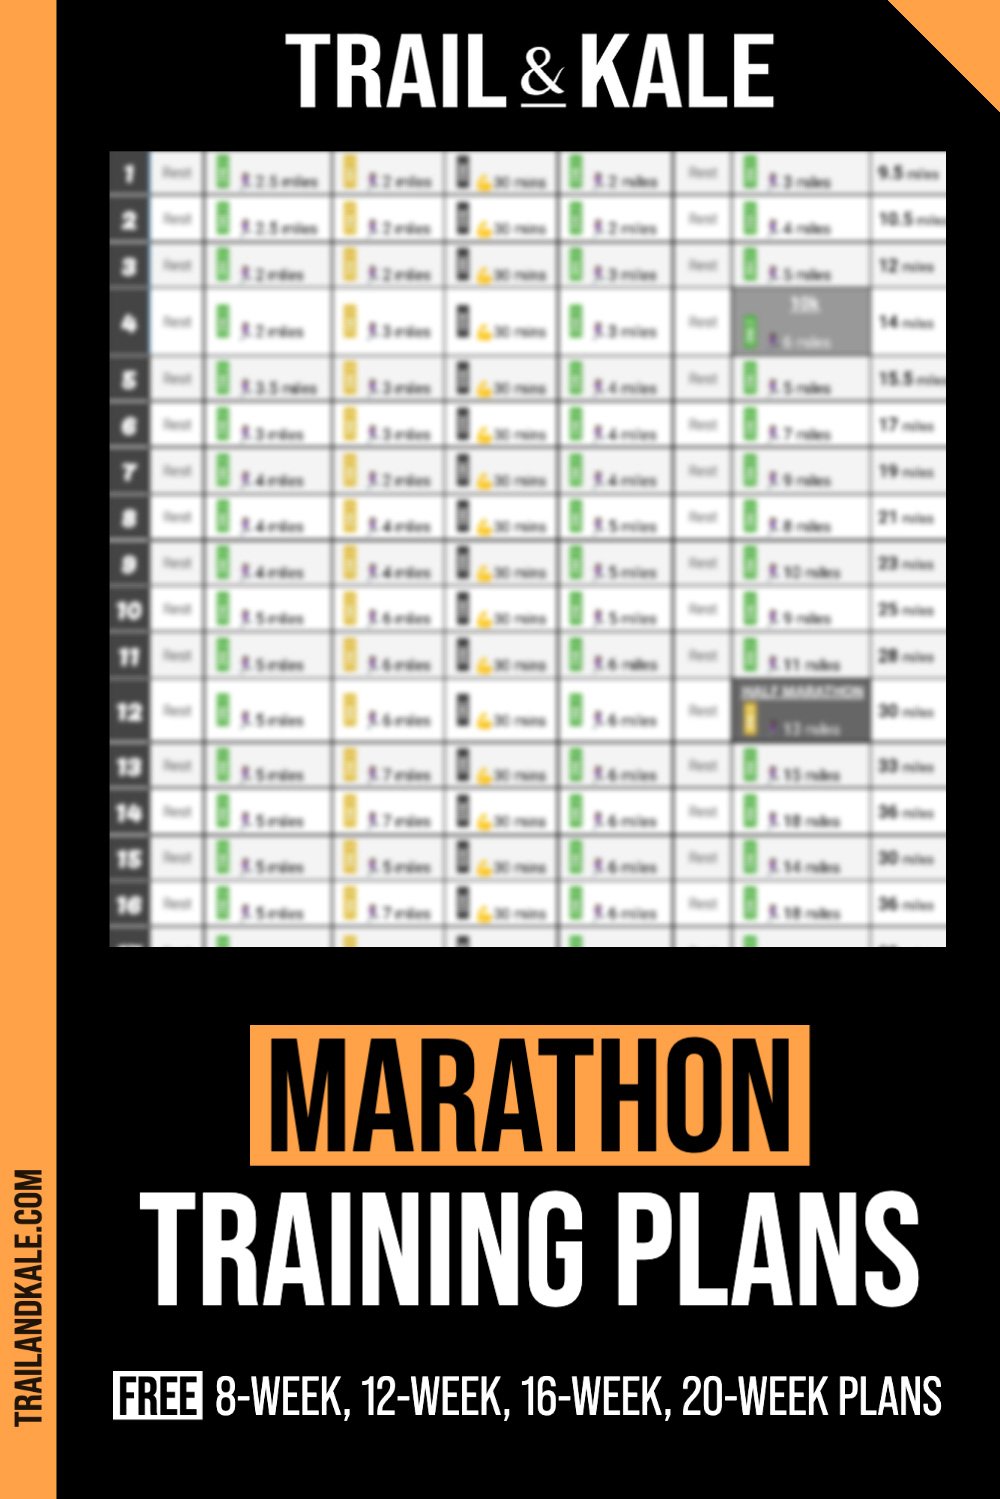 Marathon Training Plans by Trail and Kale 